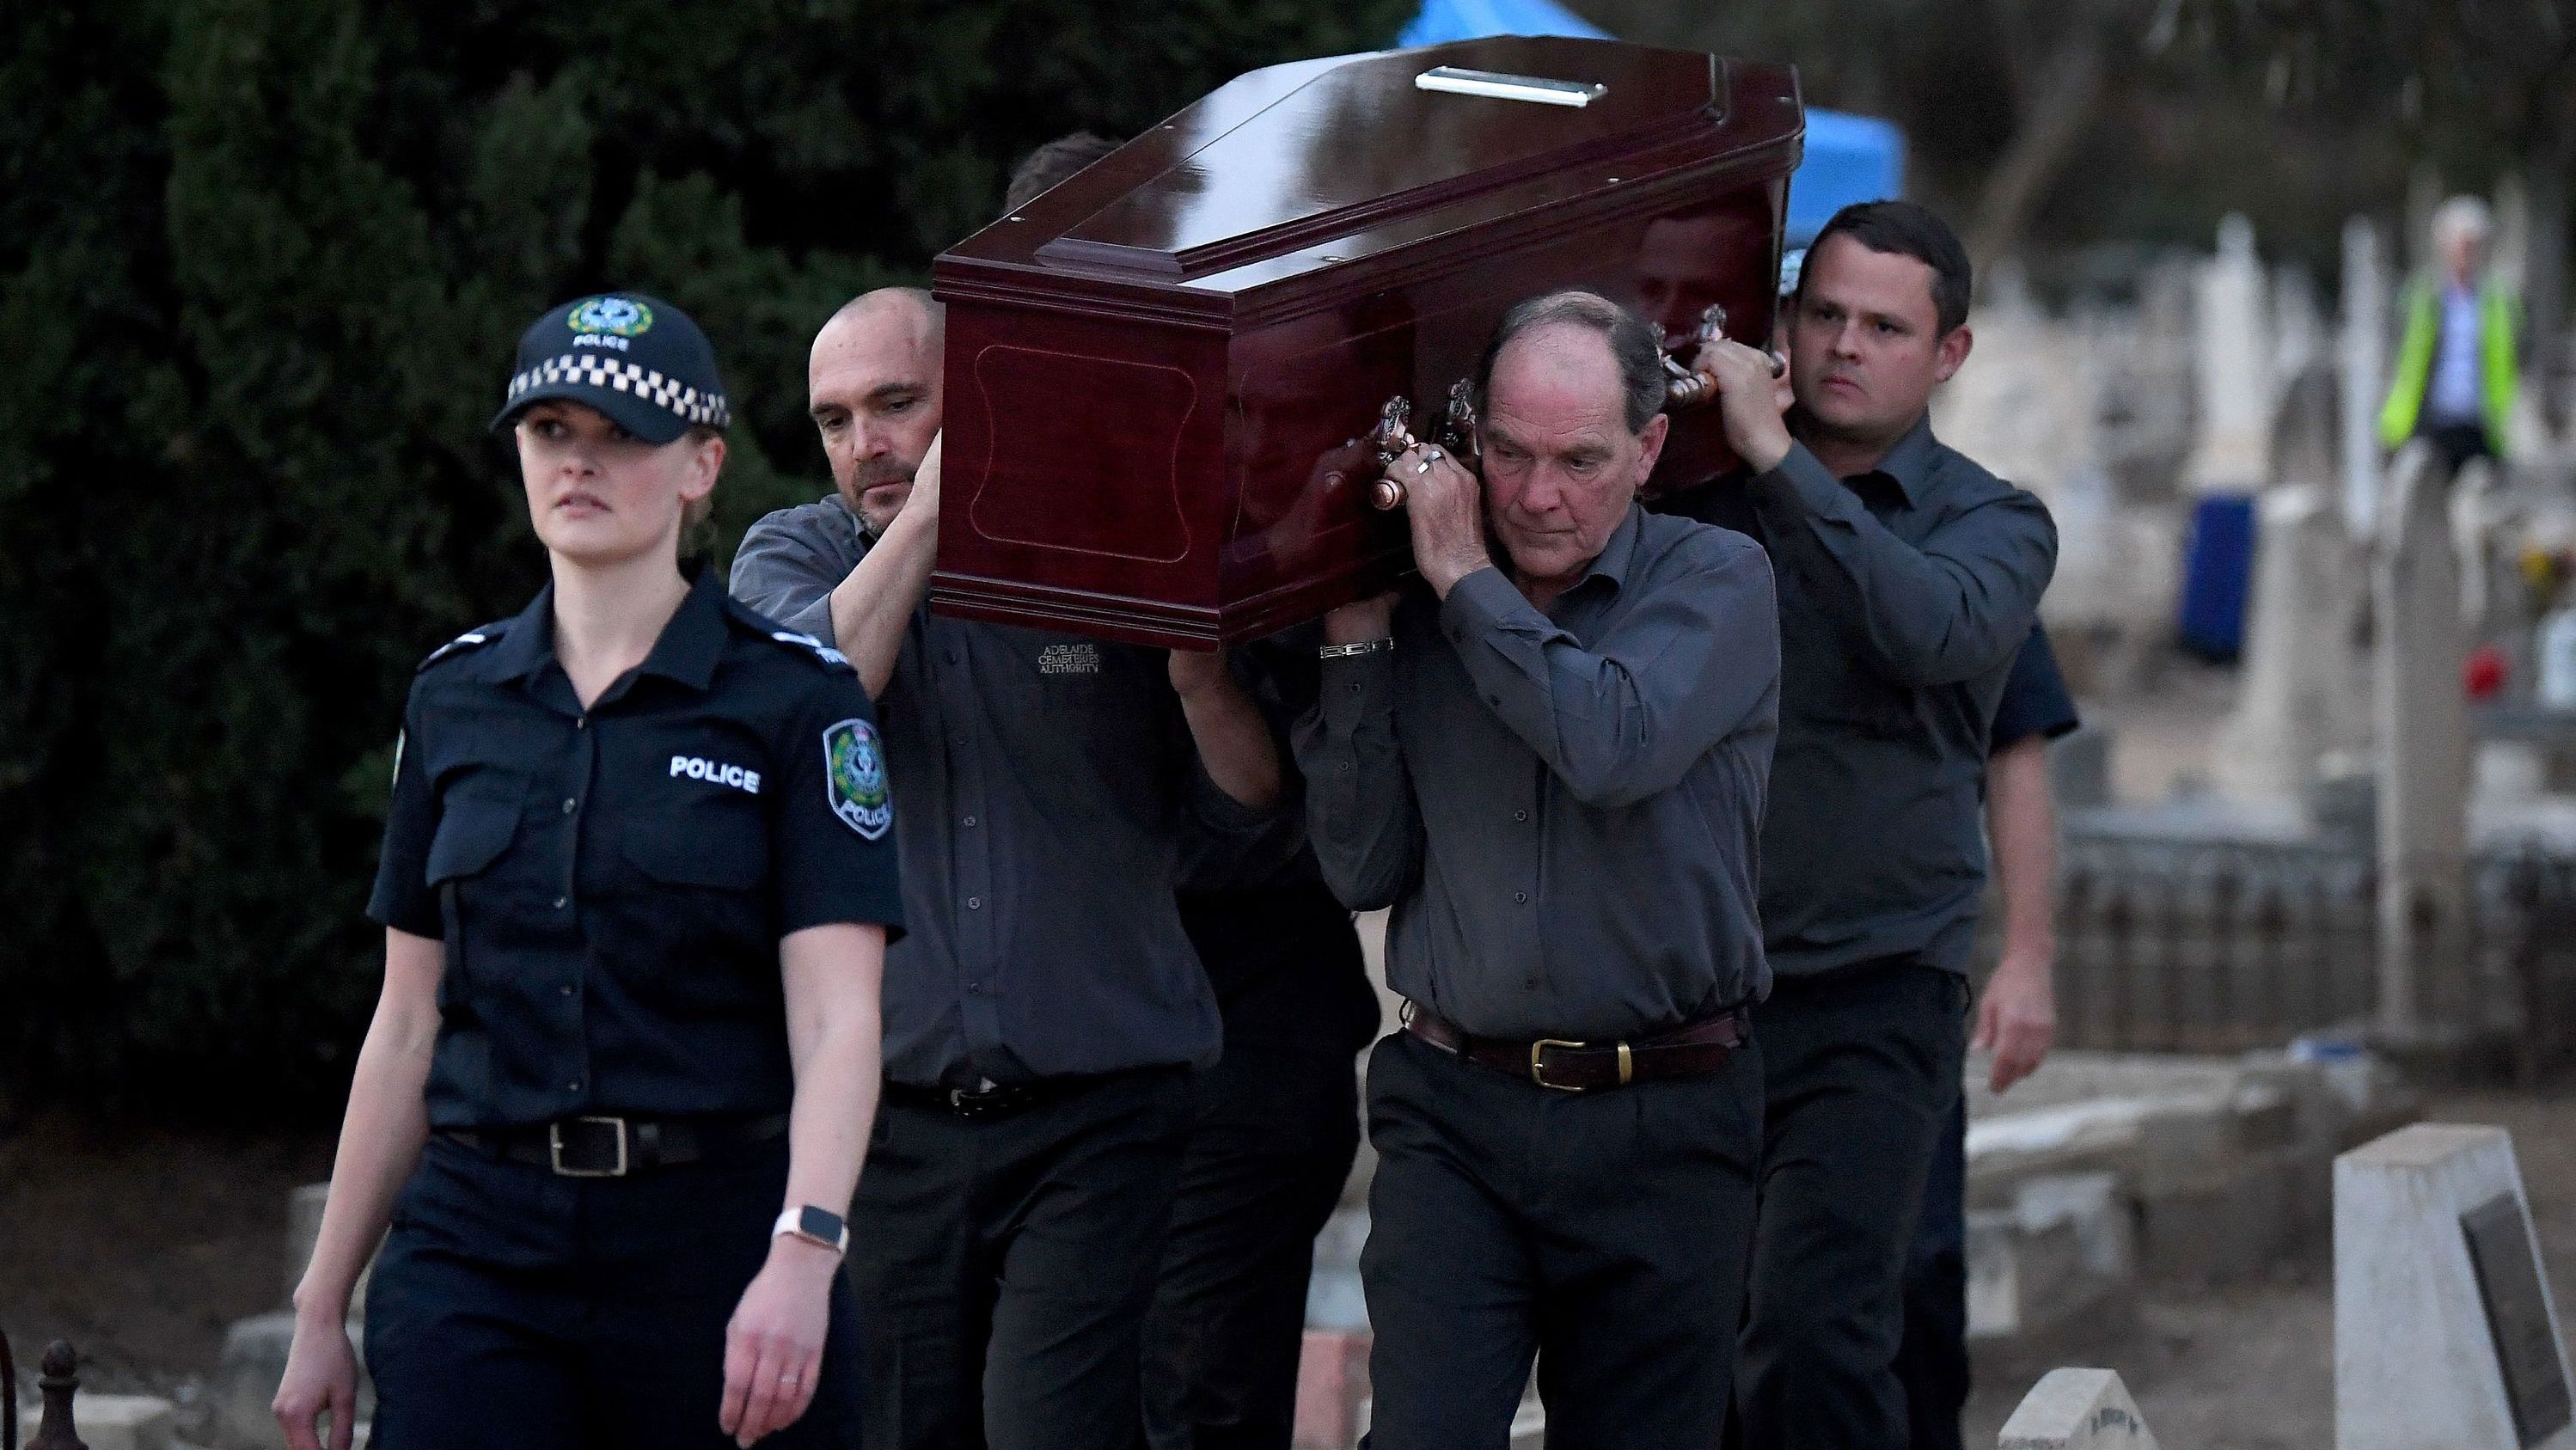 Adelaide Cemetery Authority pall bearers carry the body of the exhumed Somerton man, May 19, 2021.